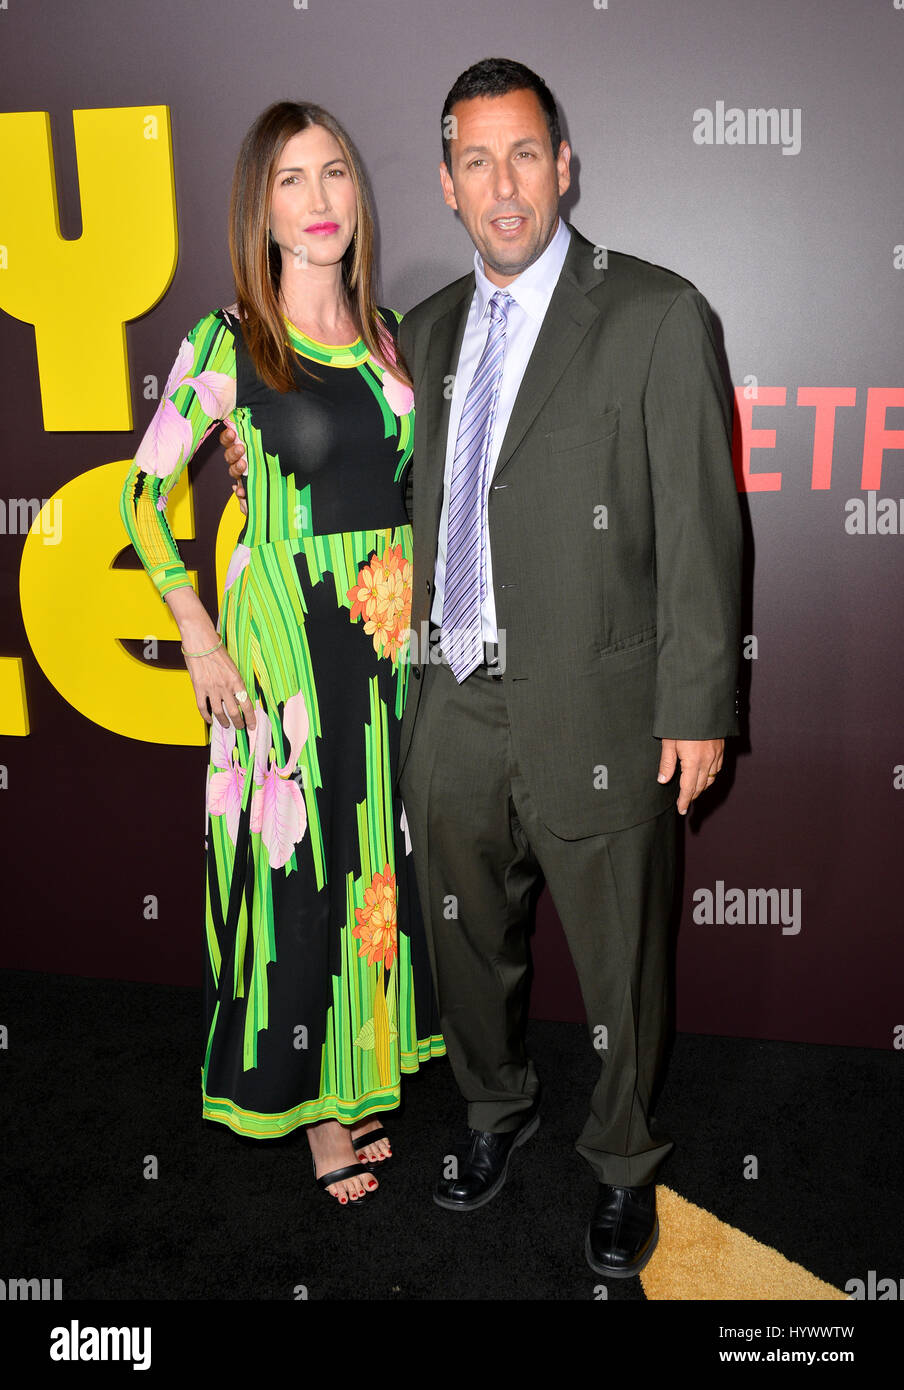 Los Angeles, USA. 06th Apr, 2017. Actor Adam Sandler & wife Jackie Sandler at the premiere for "Sandy Wexler" at The Cinerama Dome, Hollywood. Picture Credit: Sarah Stewart/Alamy Live News Stock Photo